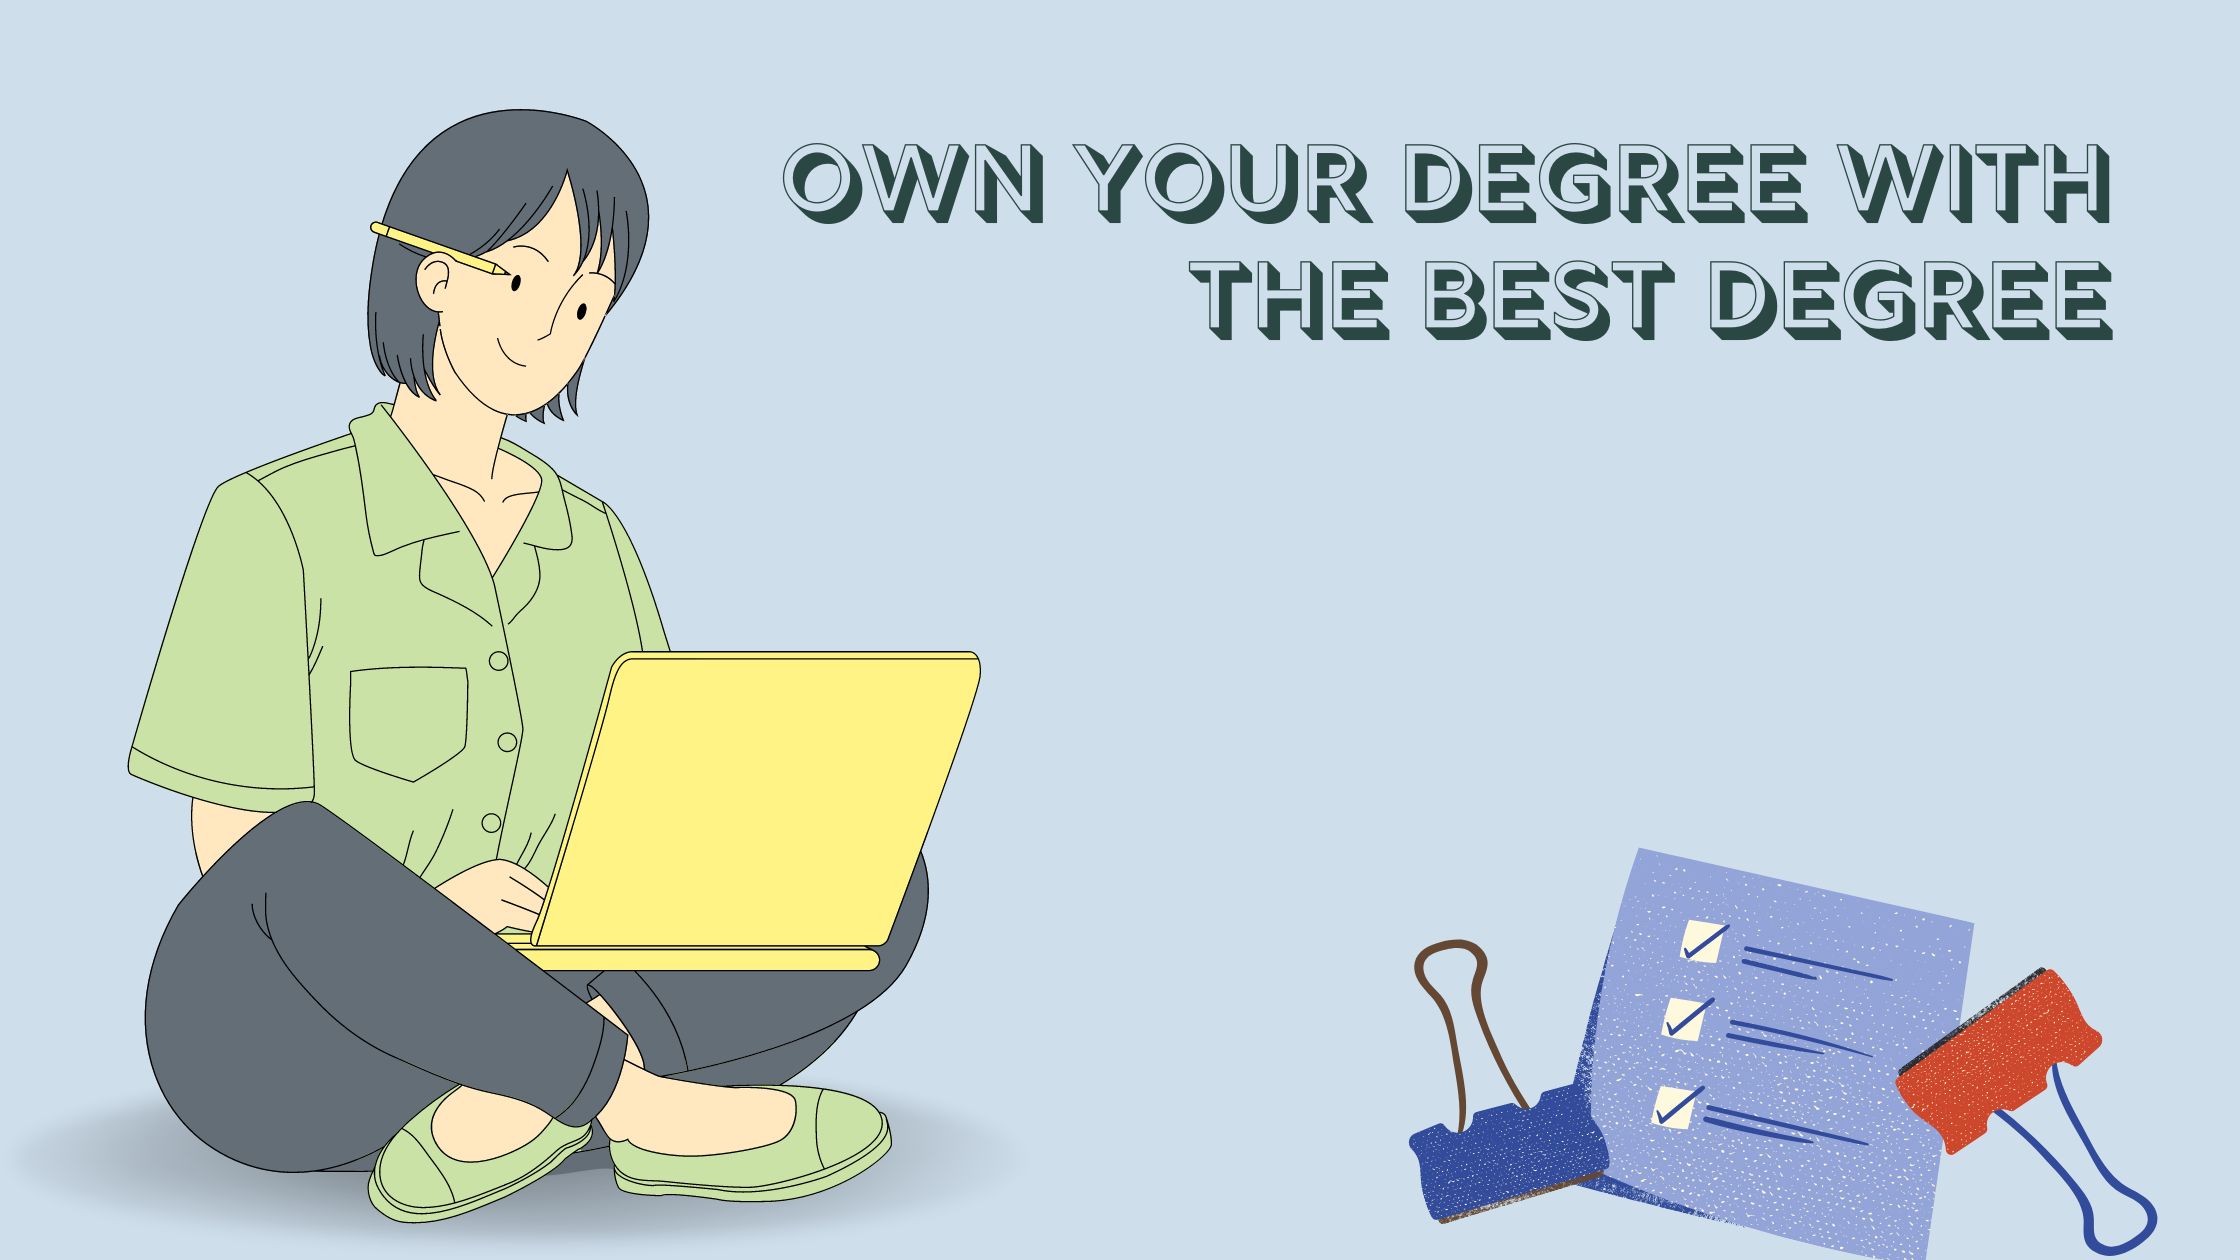 Own Your Degree With The Best Degree